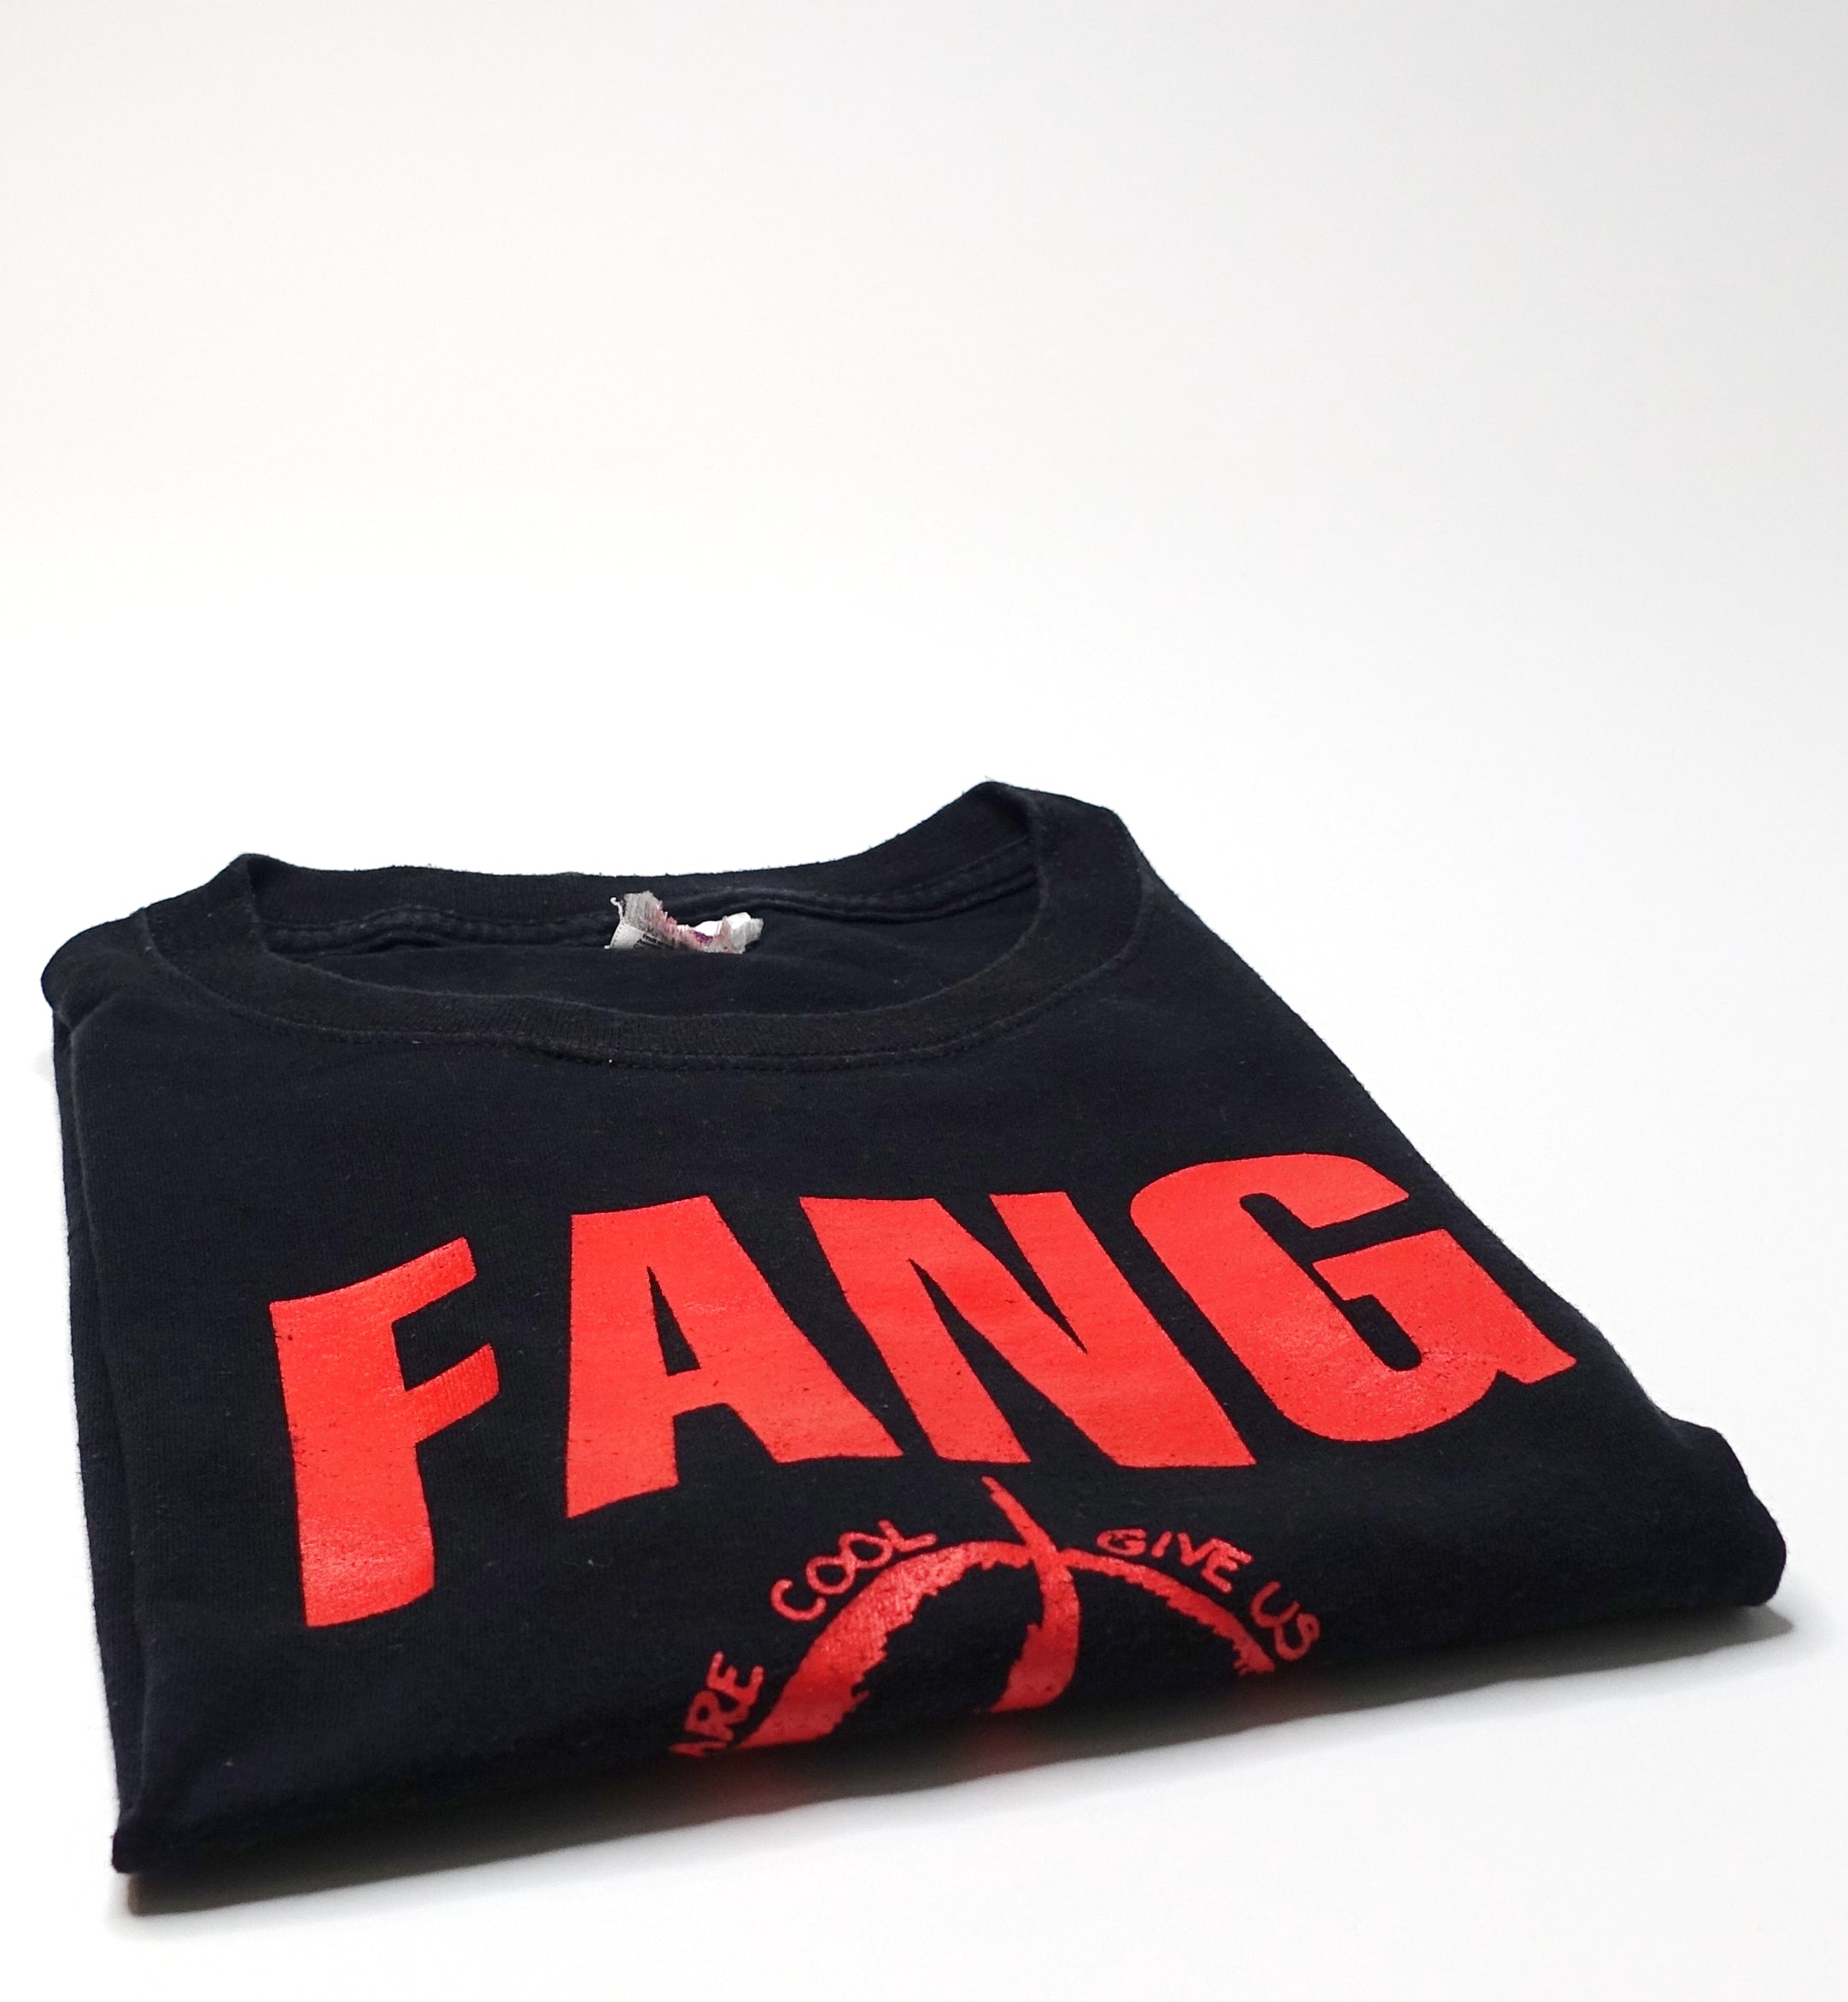 Fang – We Are Cool, Give Us Money Shirt Size XL